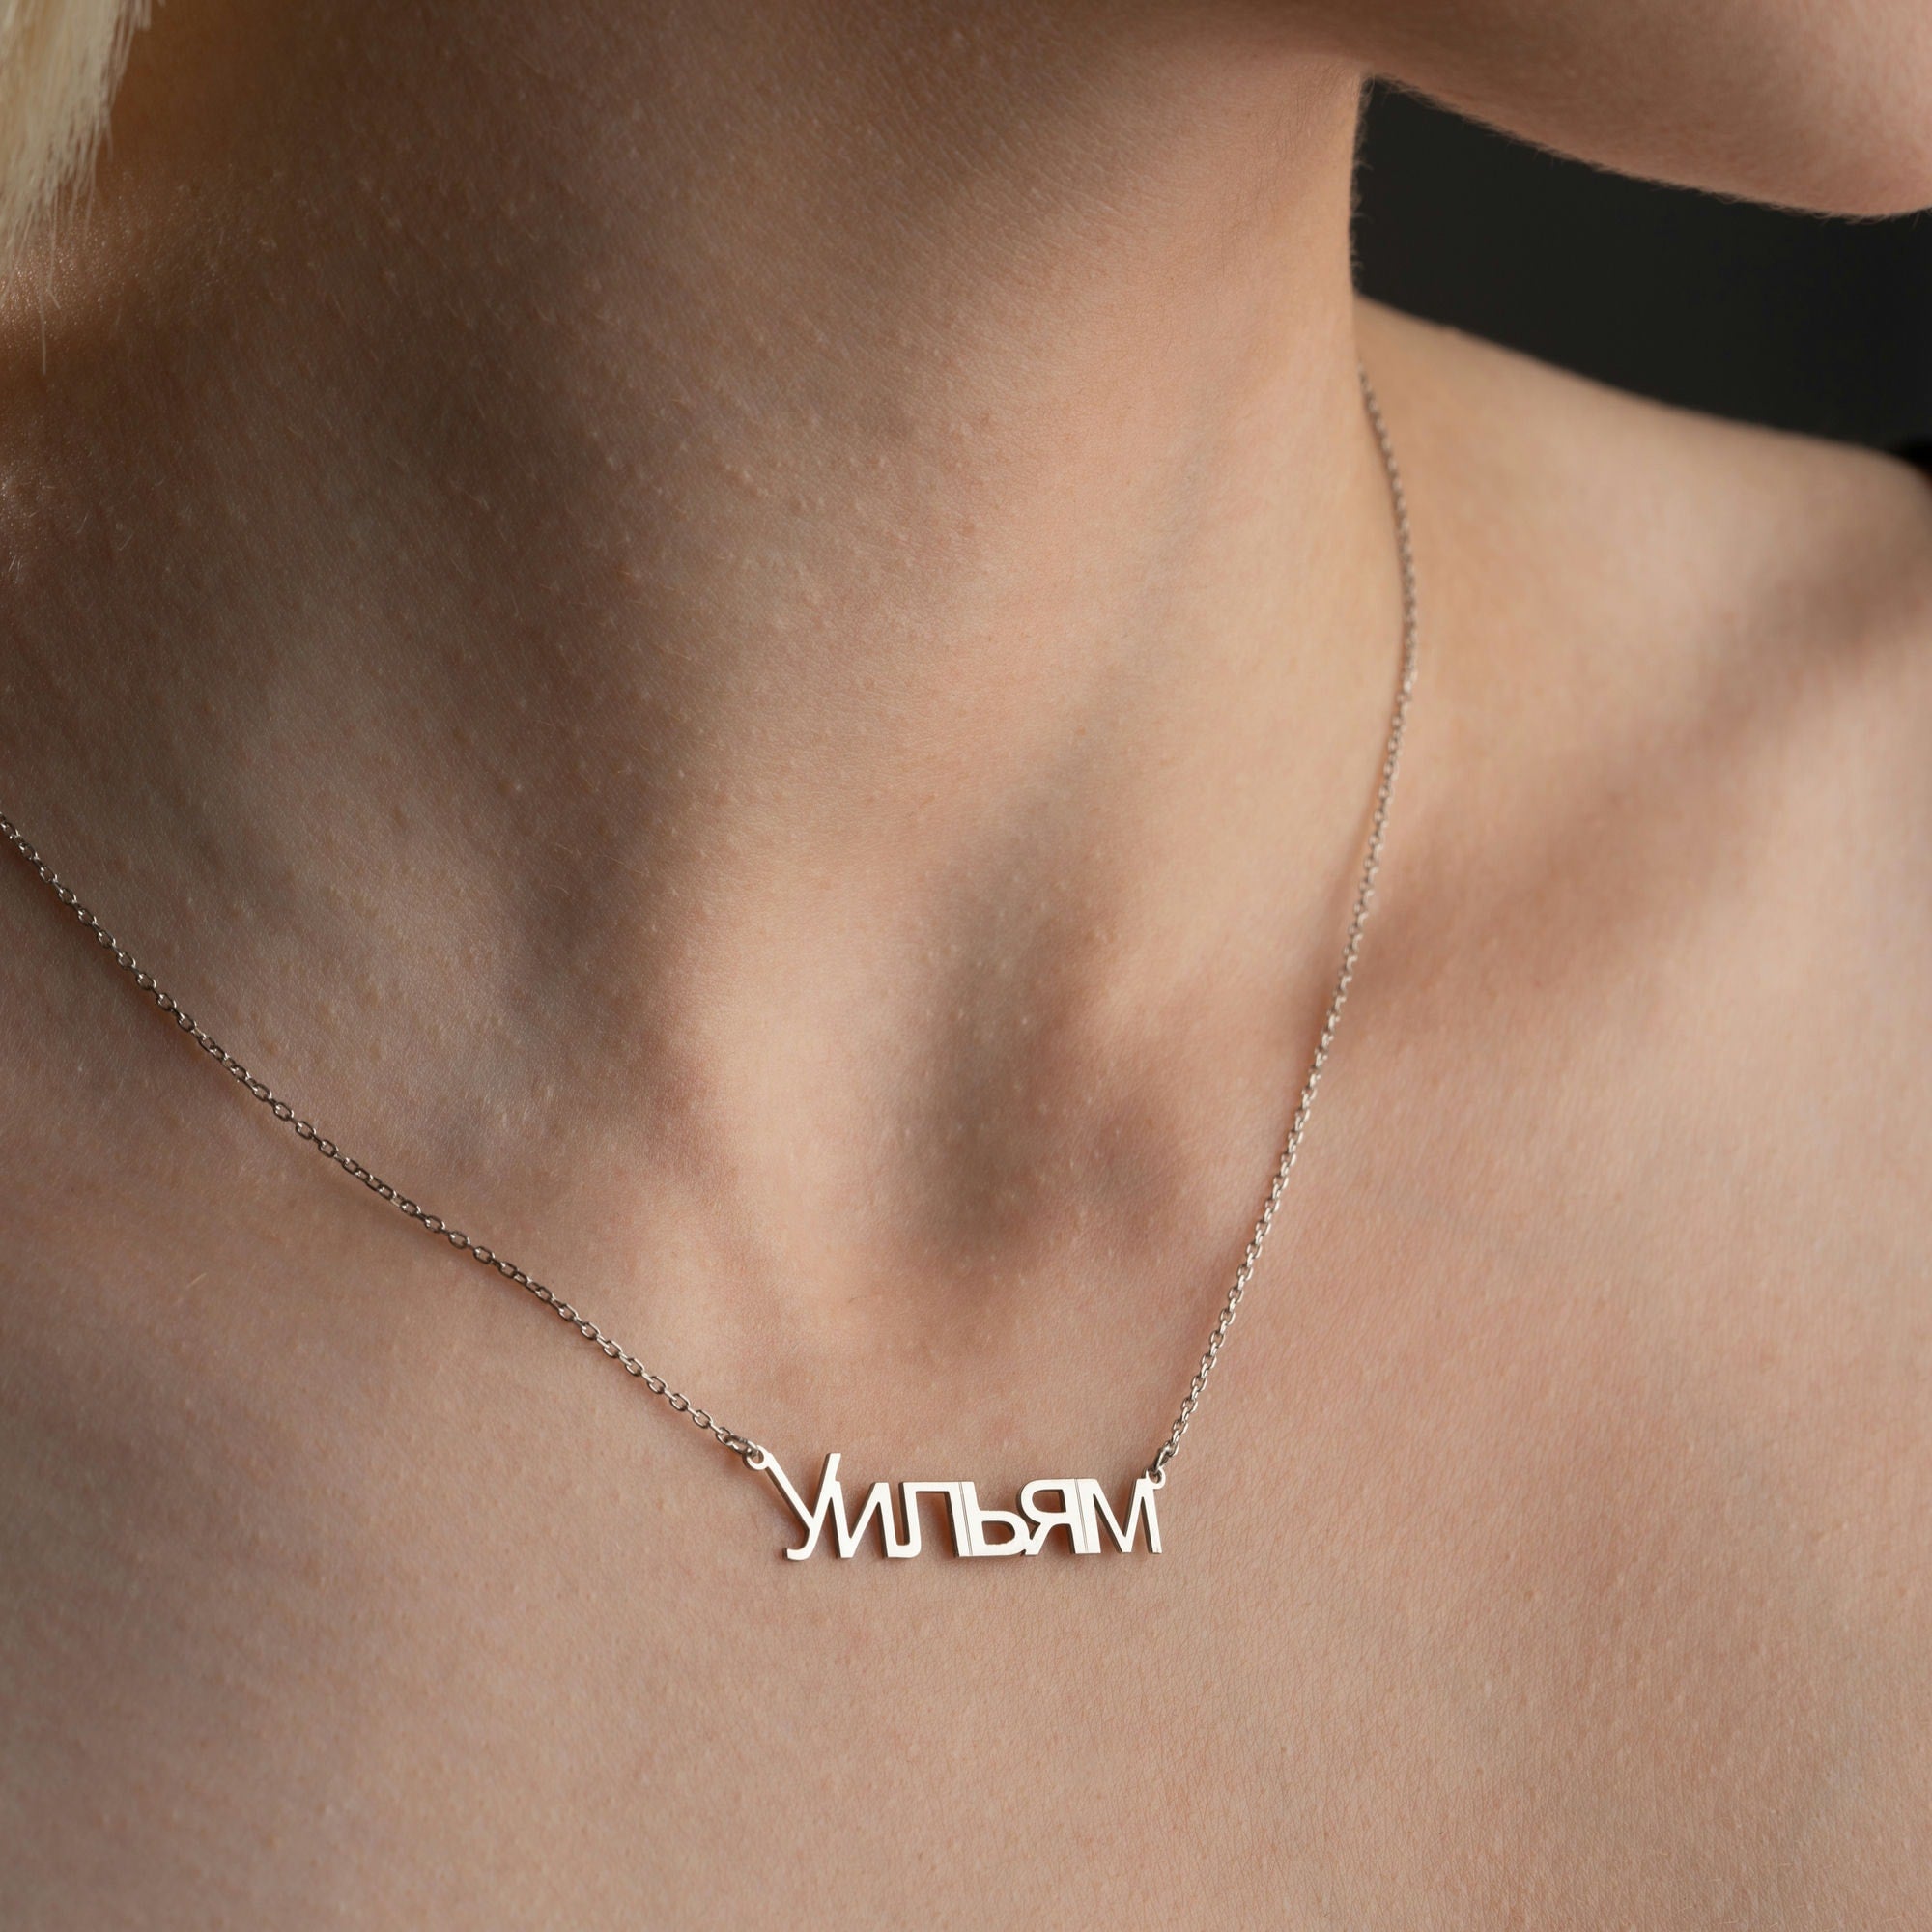 Russian Name Necklace